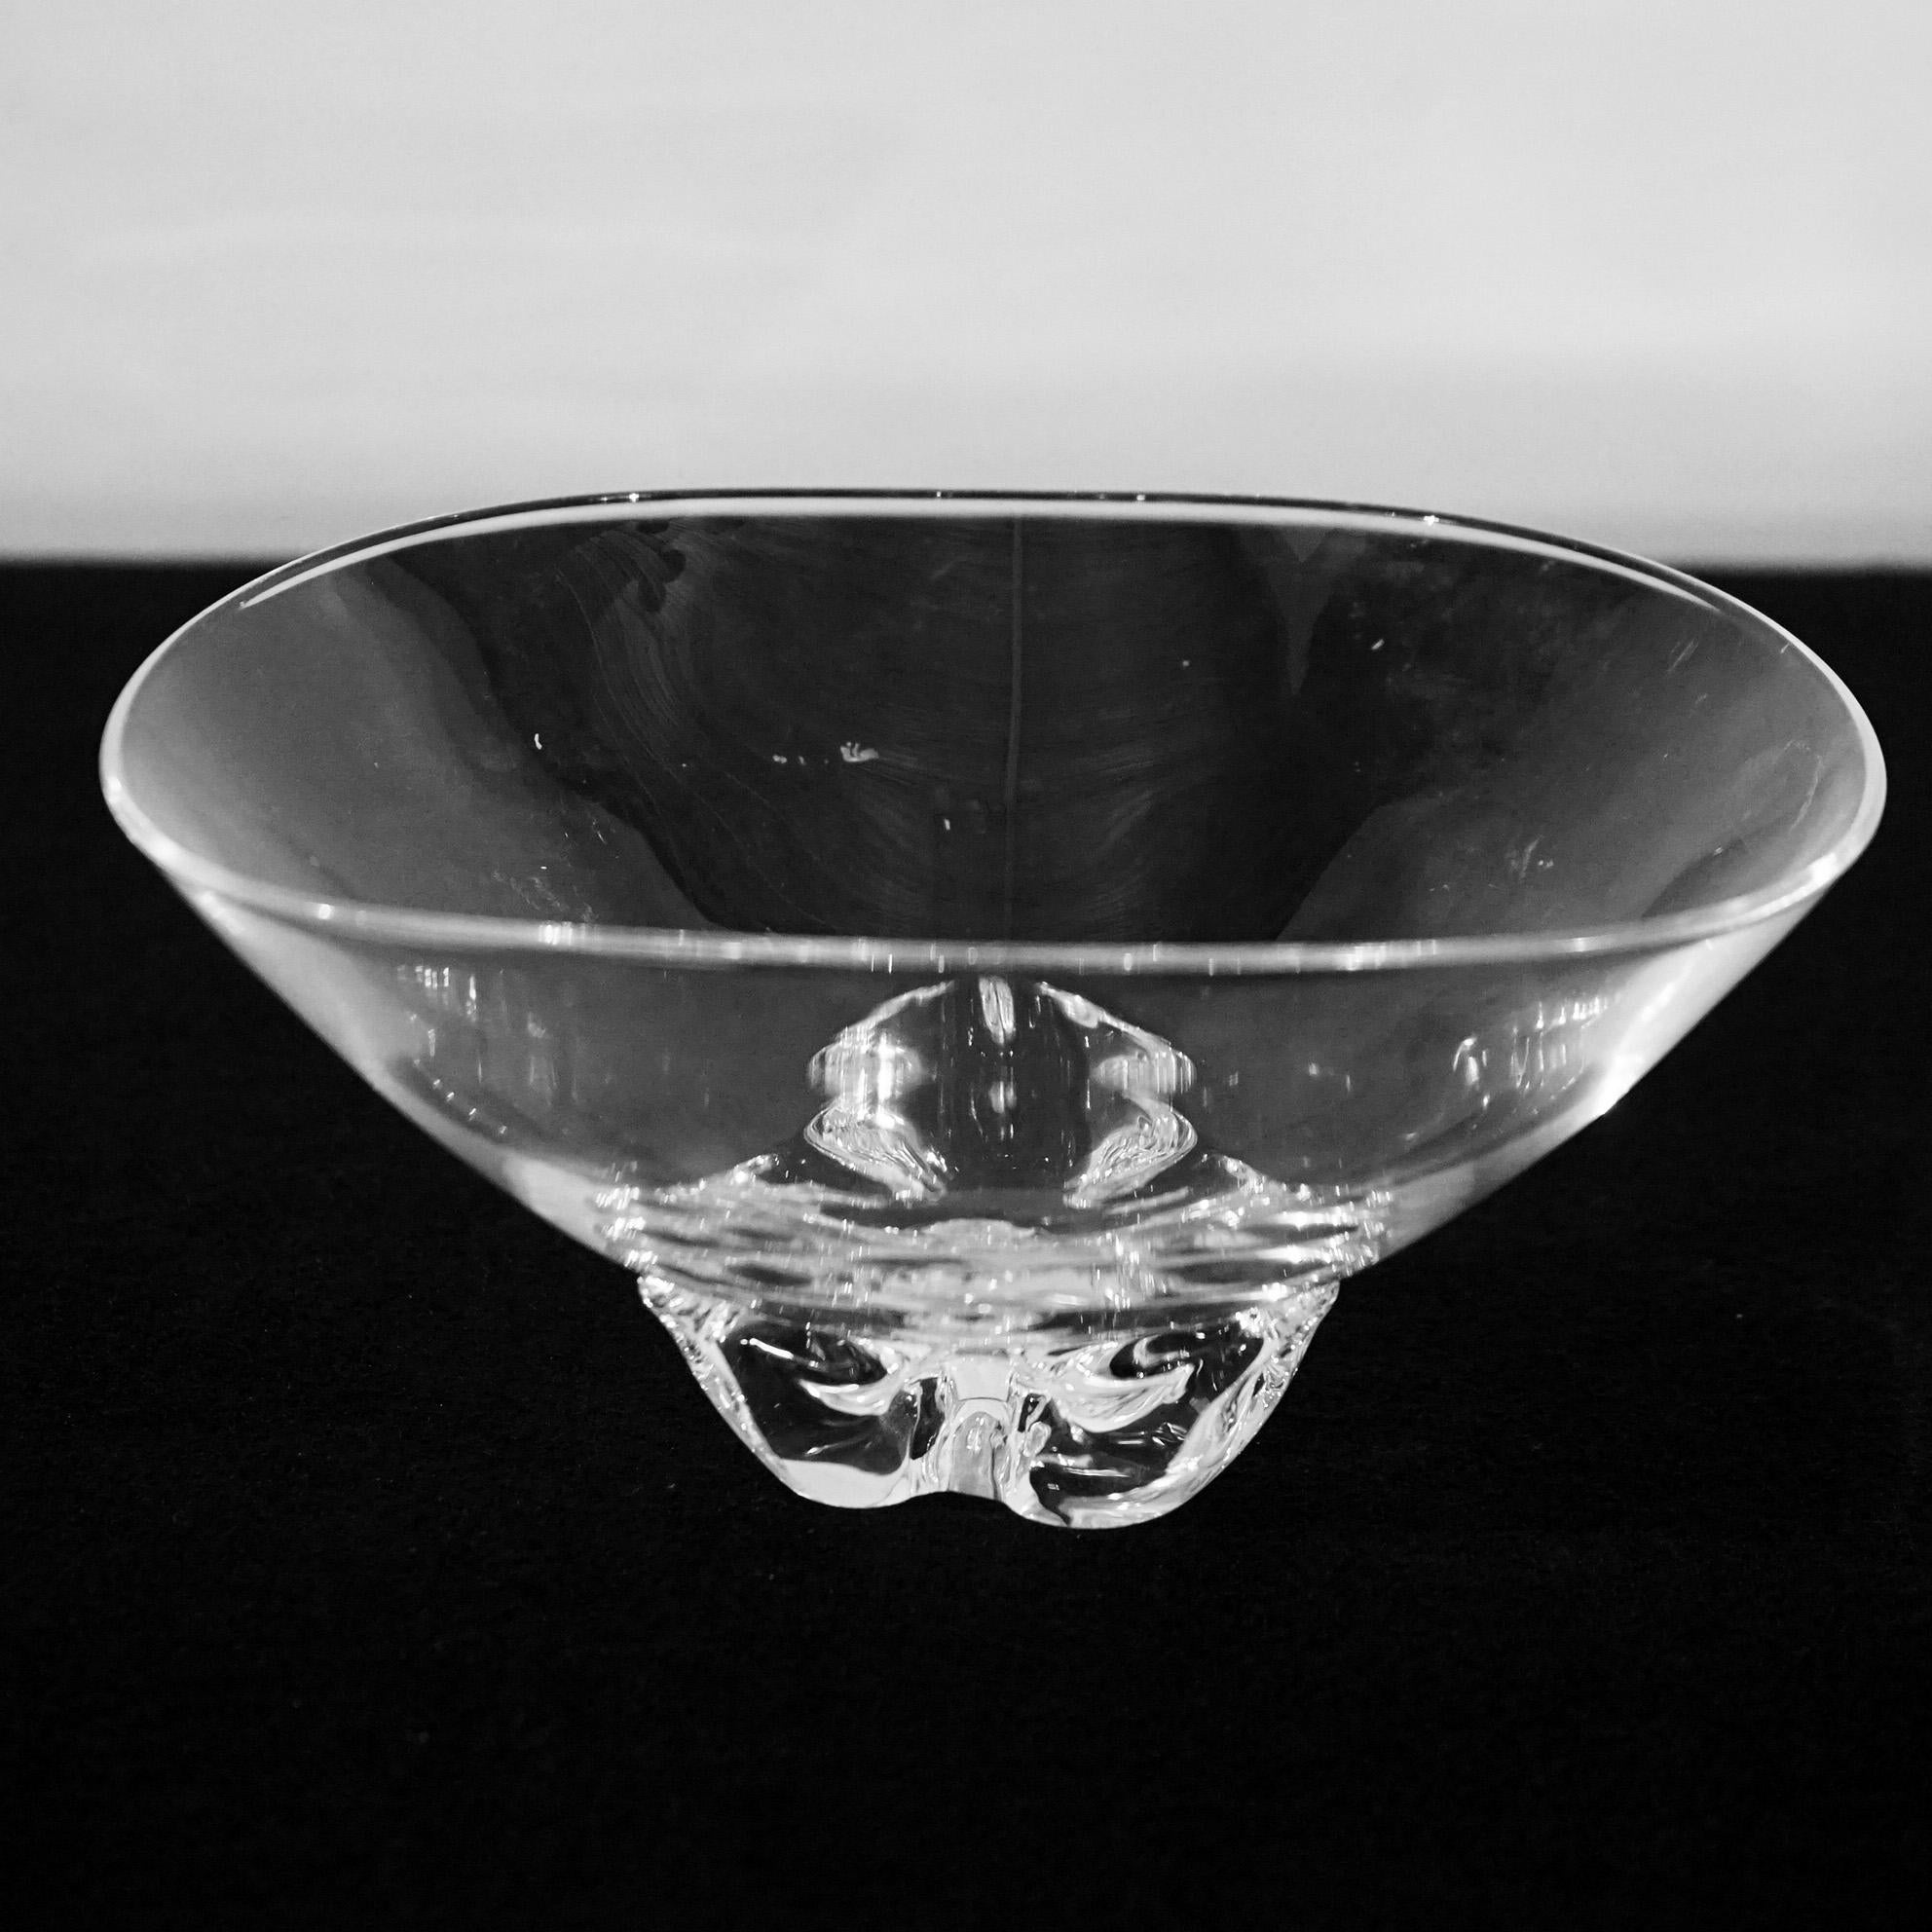 Mid Century Modern Steuben Art Glass Footed Crystal Bowl, Signed, 20thC

Measures - 5